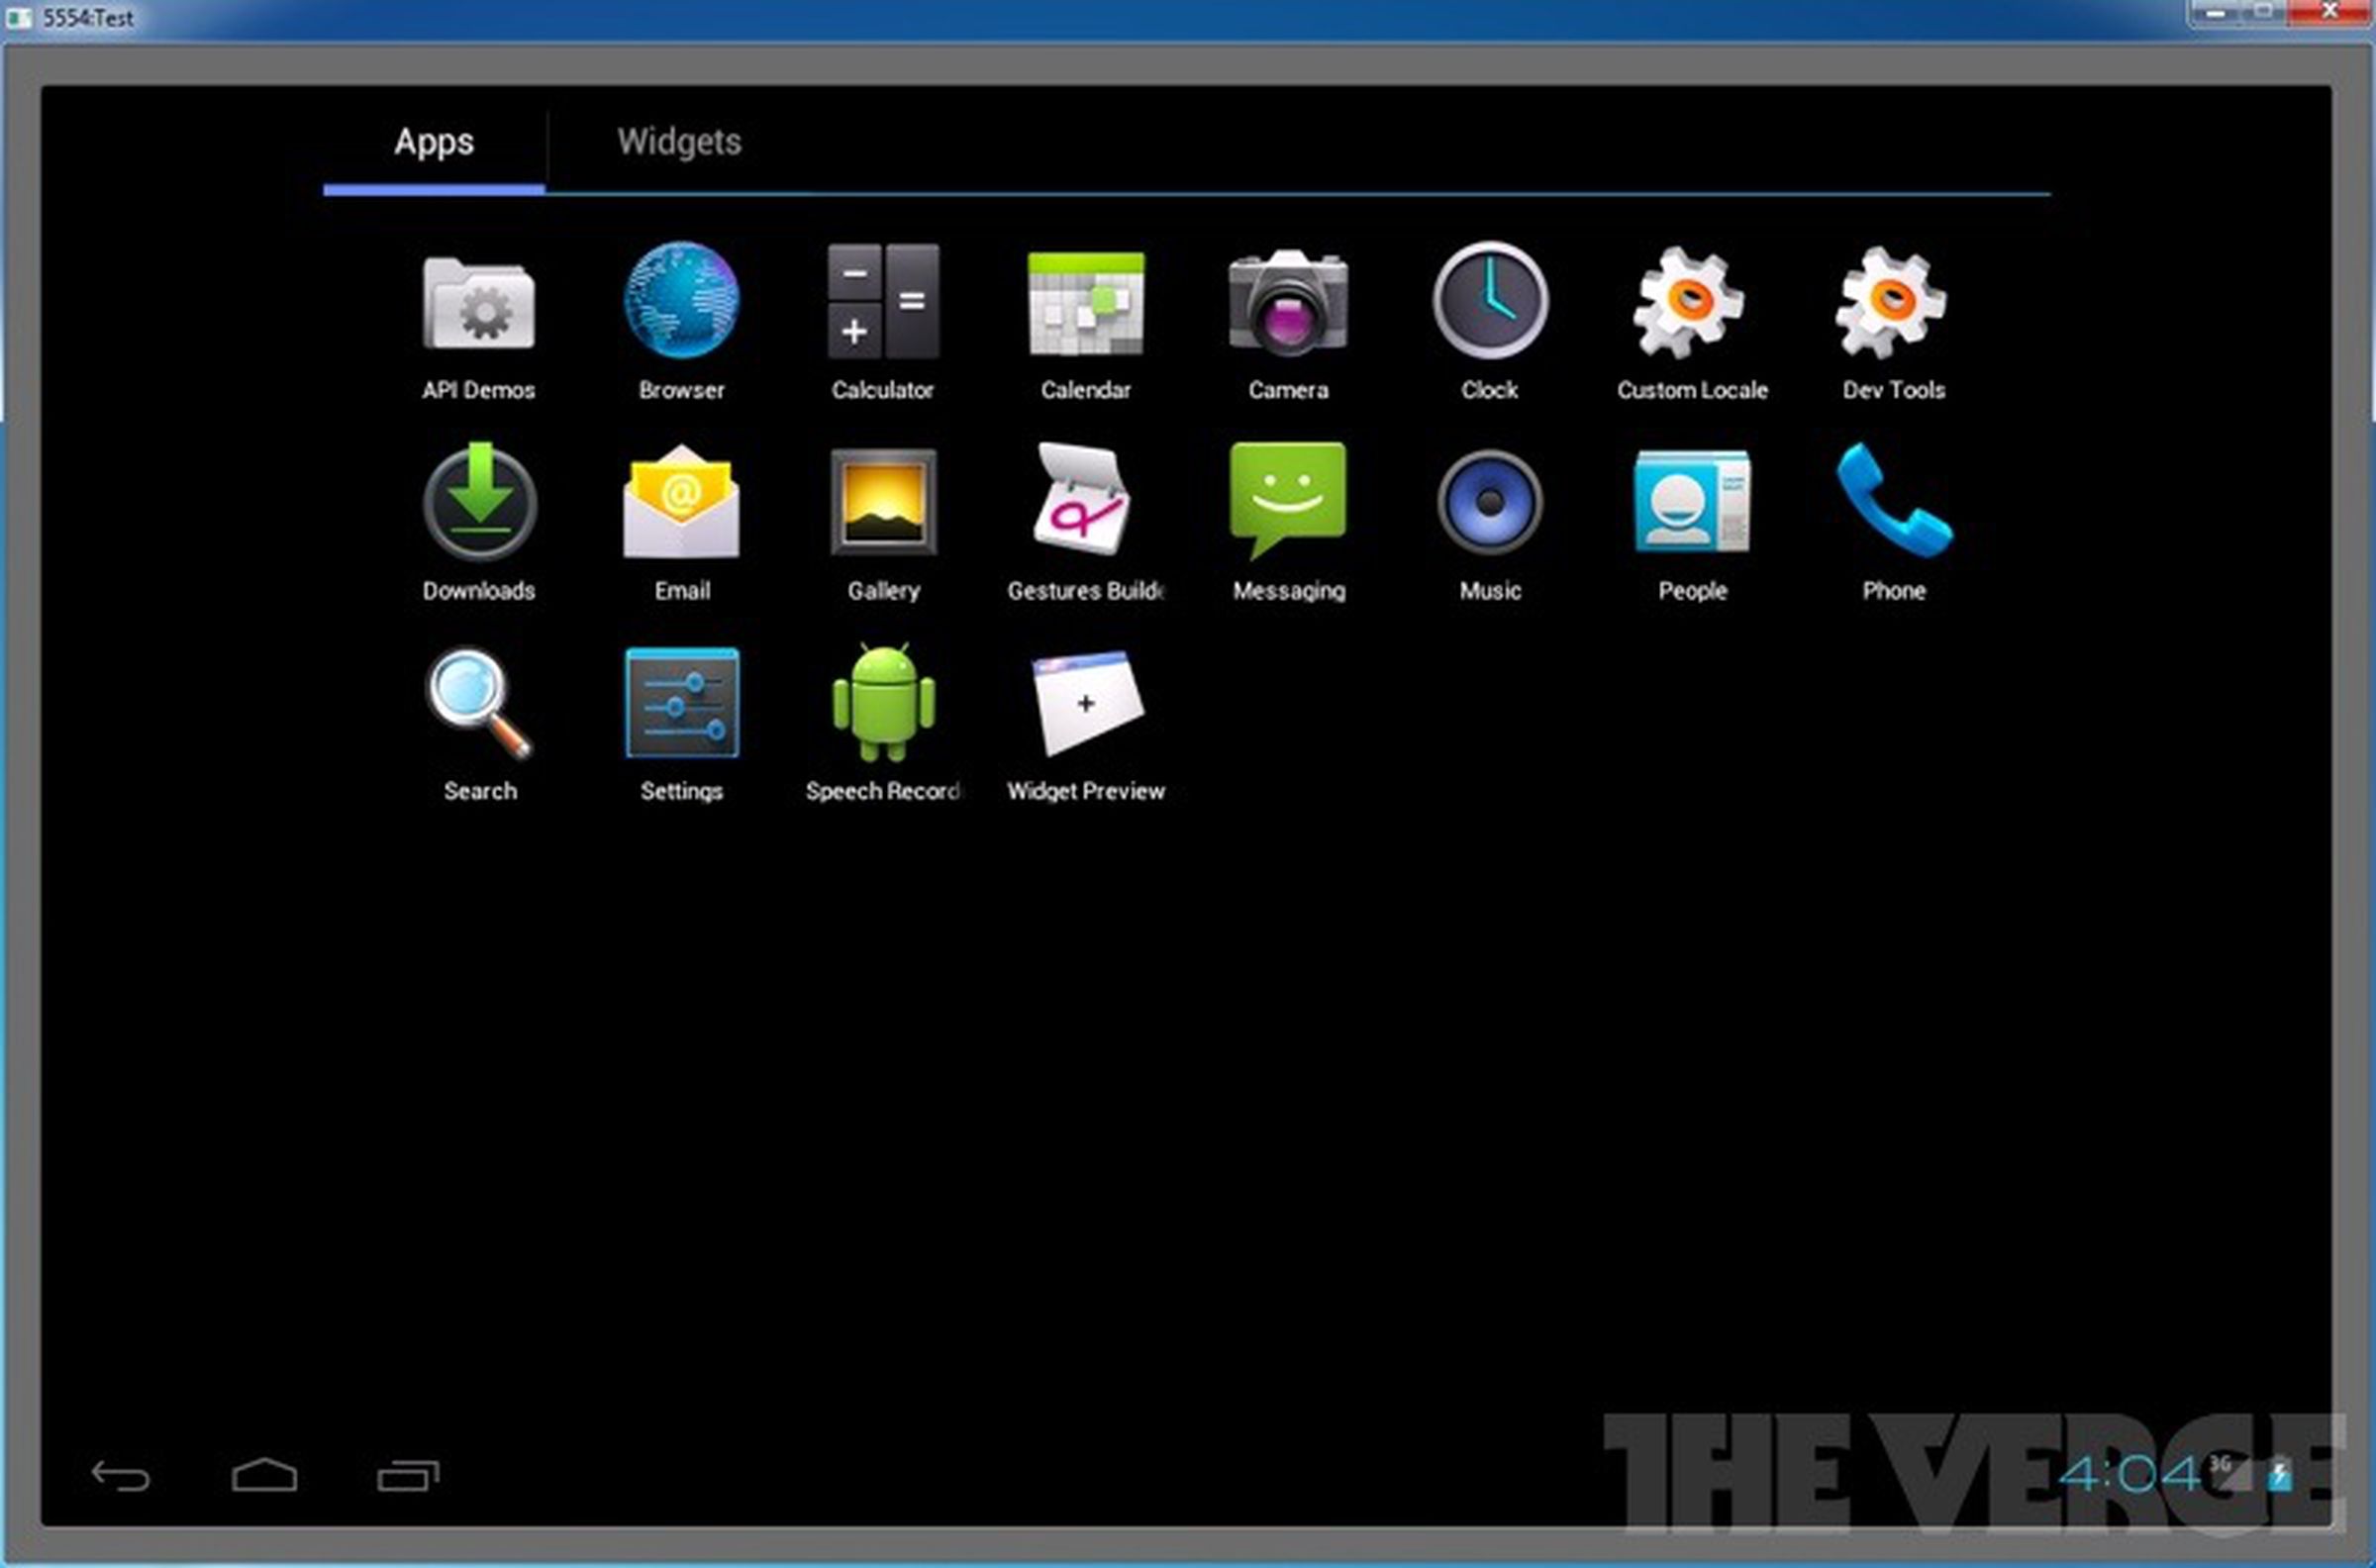 Android 4.0 Ice Cream Sandwich on a tablet, one screenshot at a time